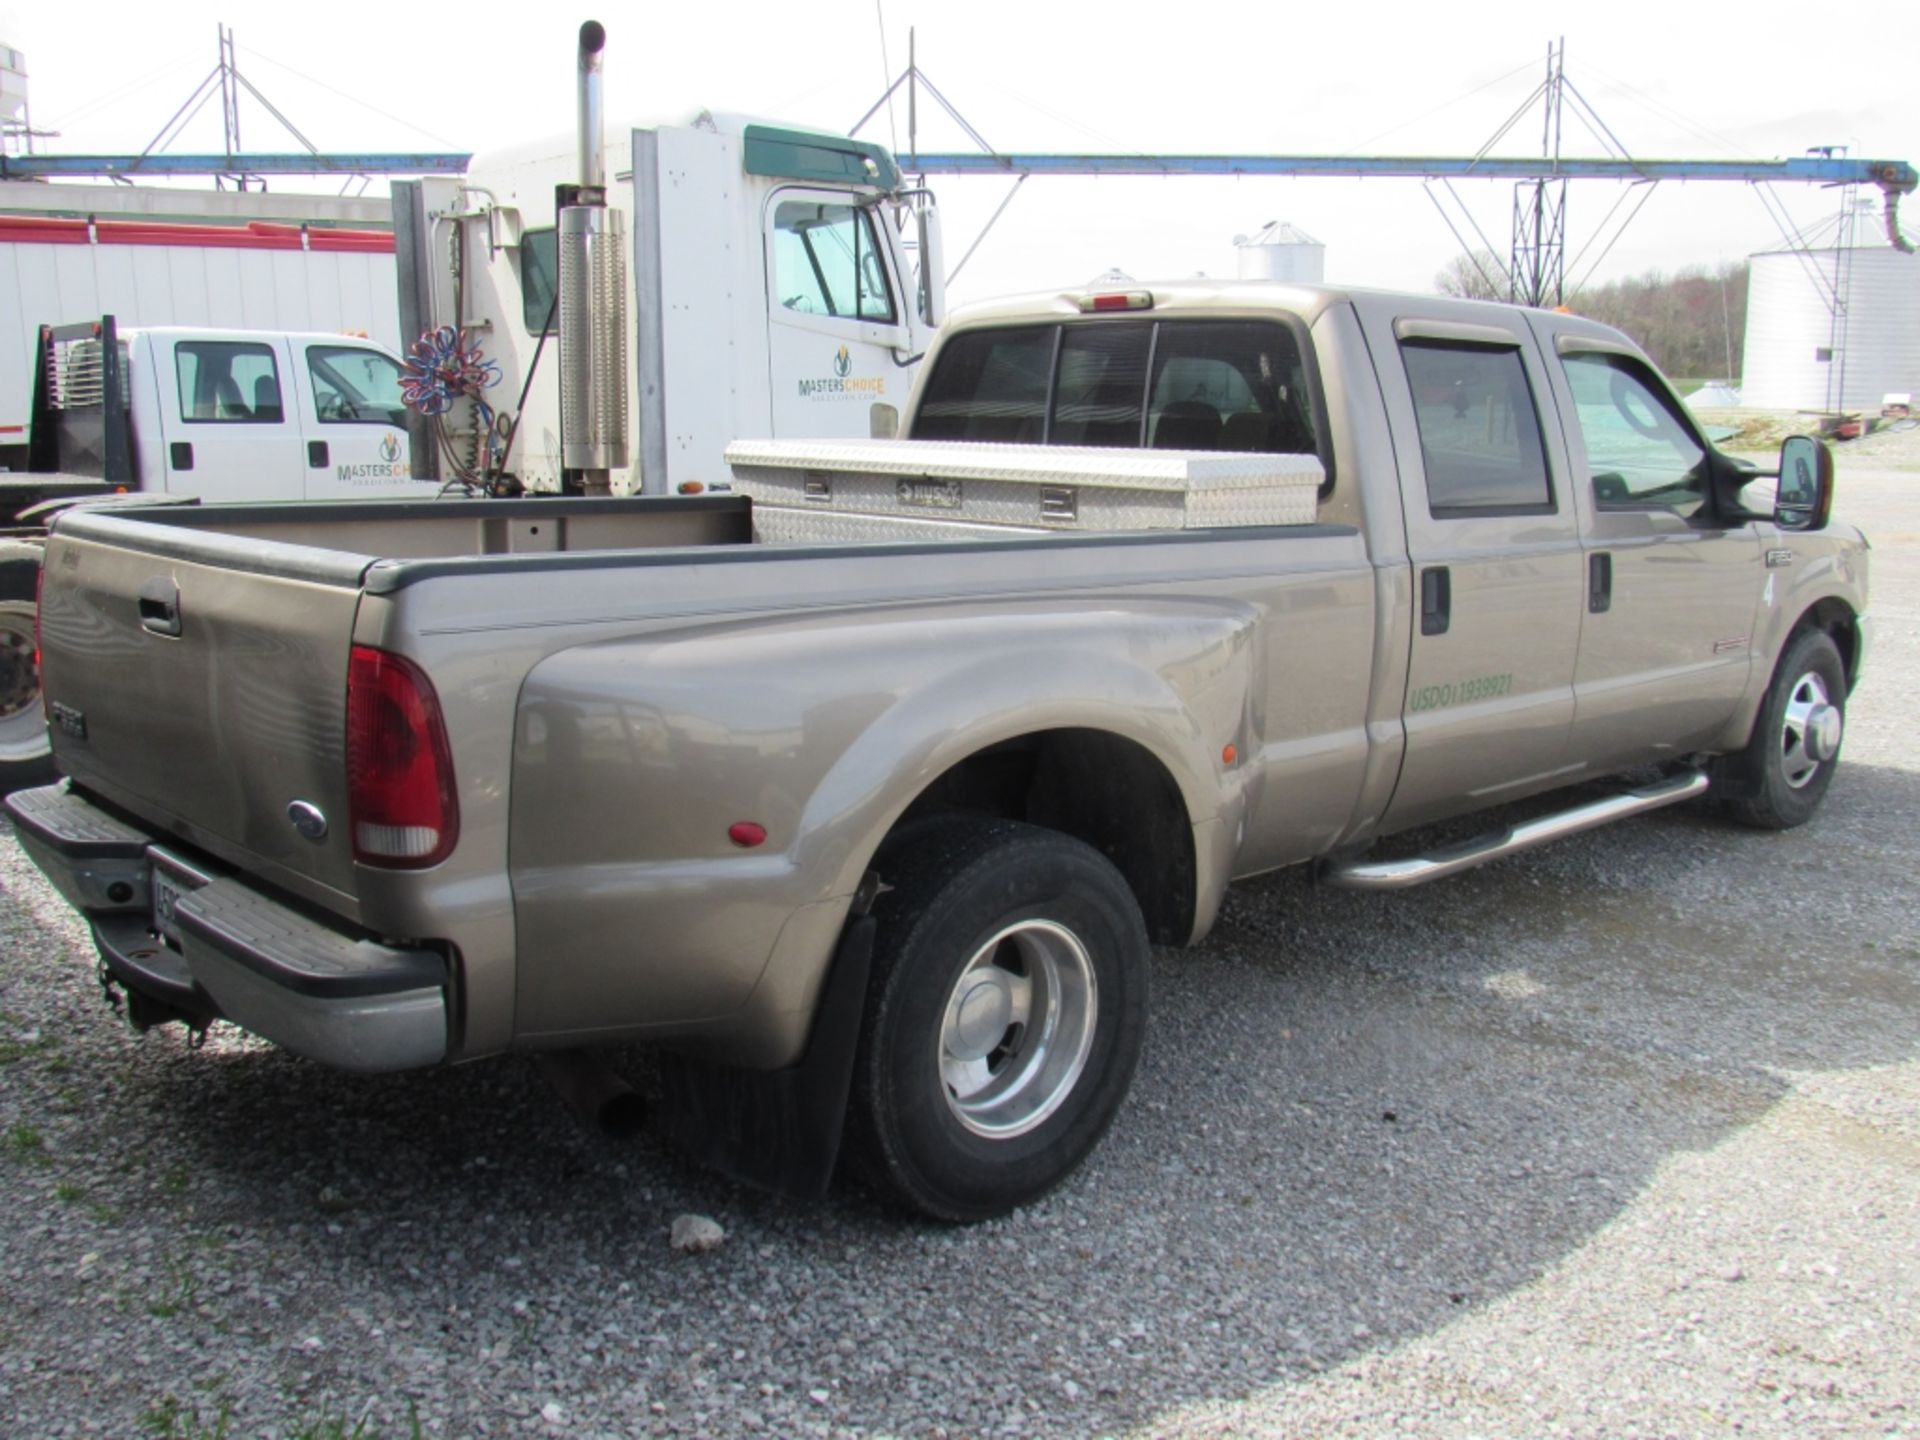 2004 Ford F-350 XLT 2wd 6.0L Powerstroke Diesel Engine - Image 18 of 22